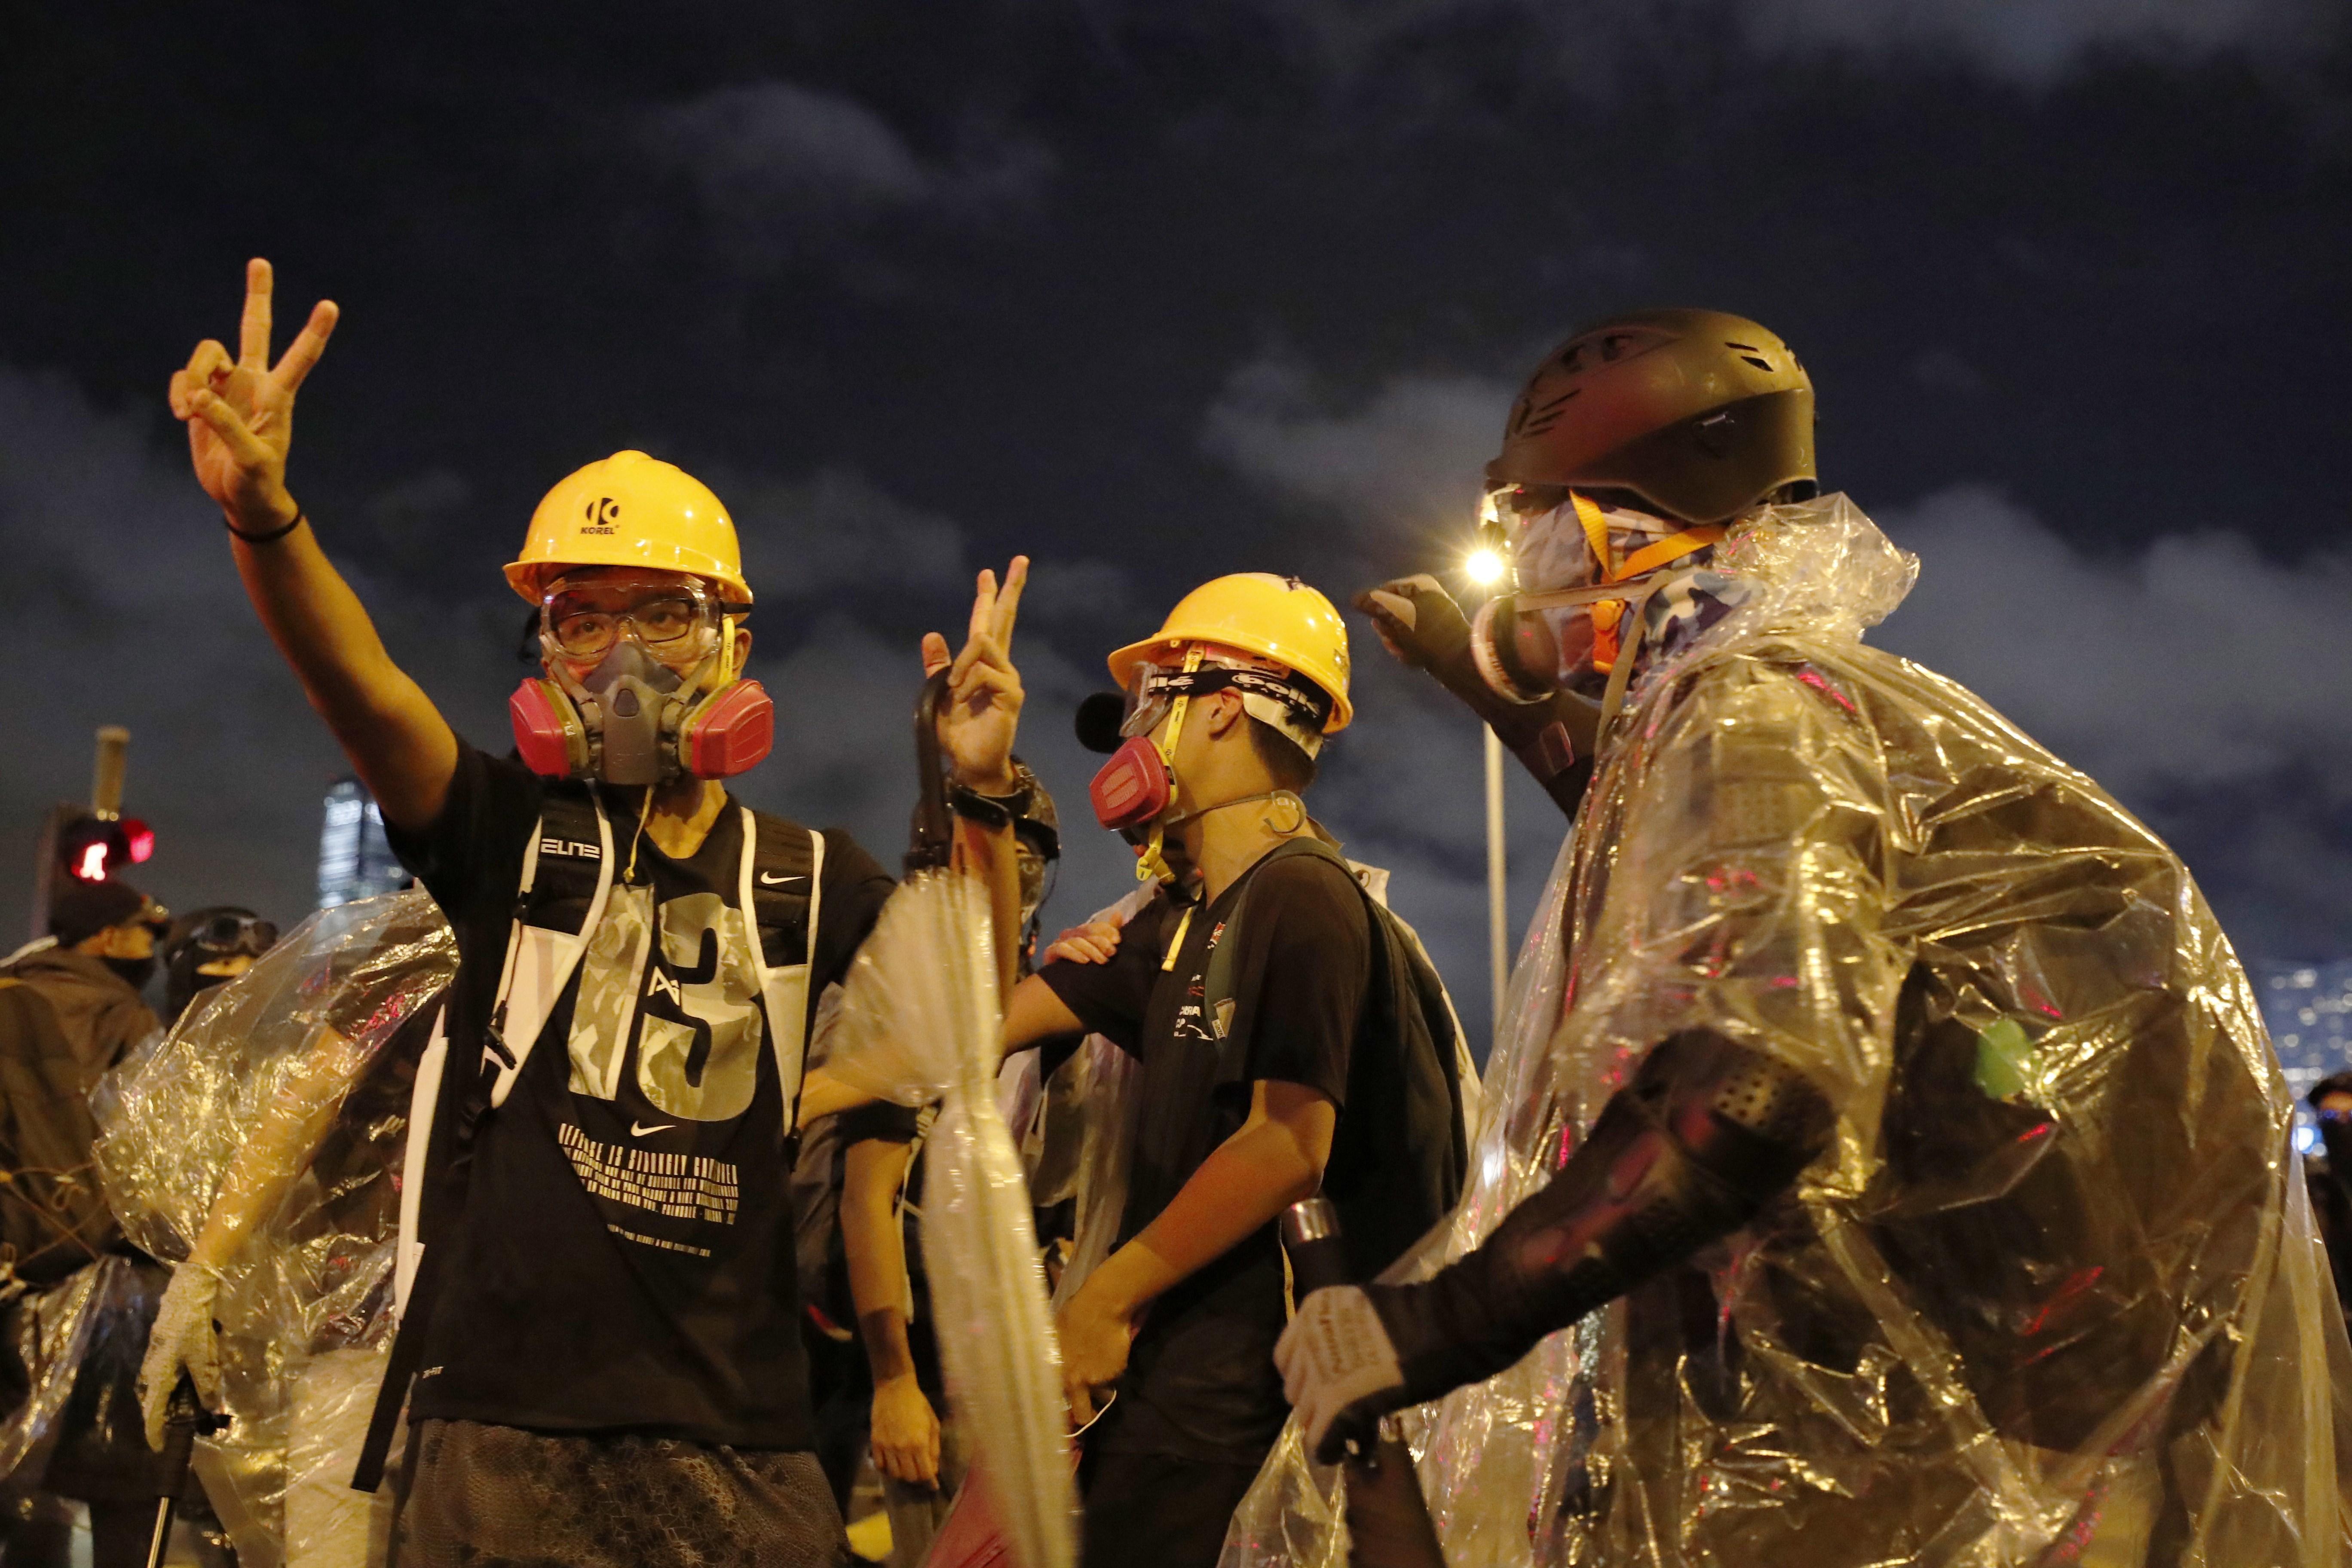 "Protests work": Catalan independence movement looks to Hong Kong